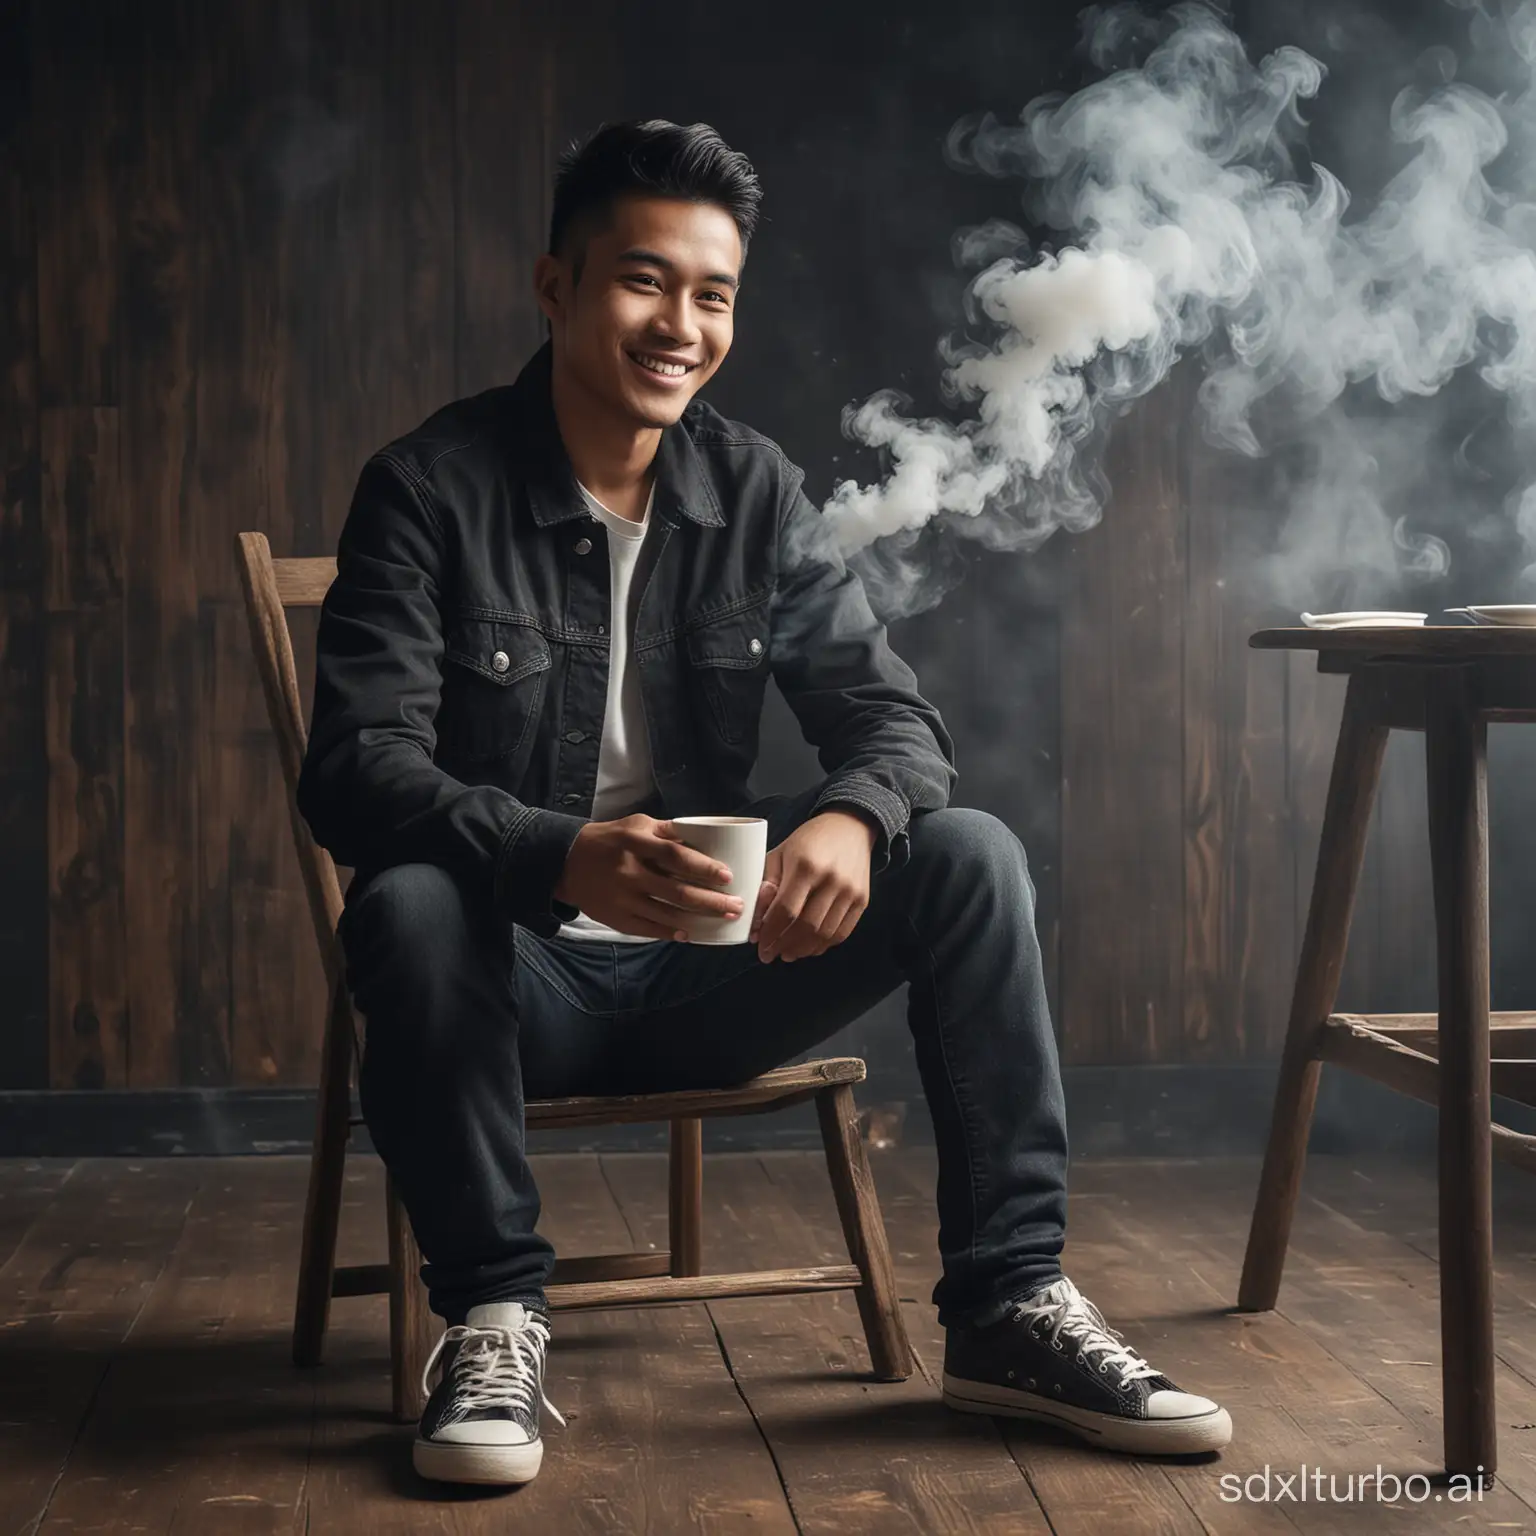 Realist a young man, Indonesian face, wearing a black jacket, wearing jeans, wearing sneakers, sitting on a wooden chair, smiling, while carrying a cup of warm coffee, smoke effect, black rustic photography background, UHD, Hasselblad X1D II  50c Camera, iso 200